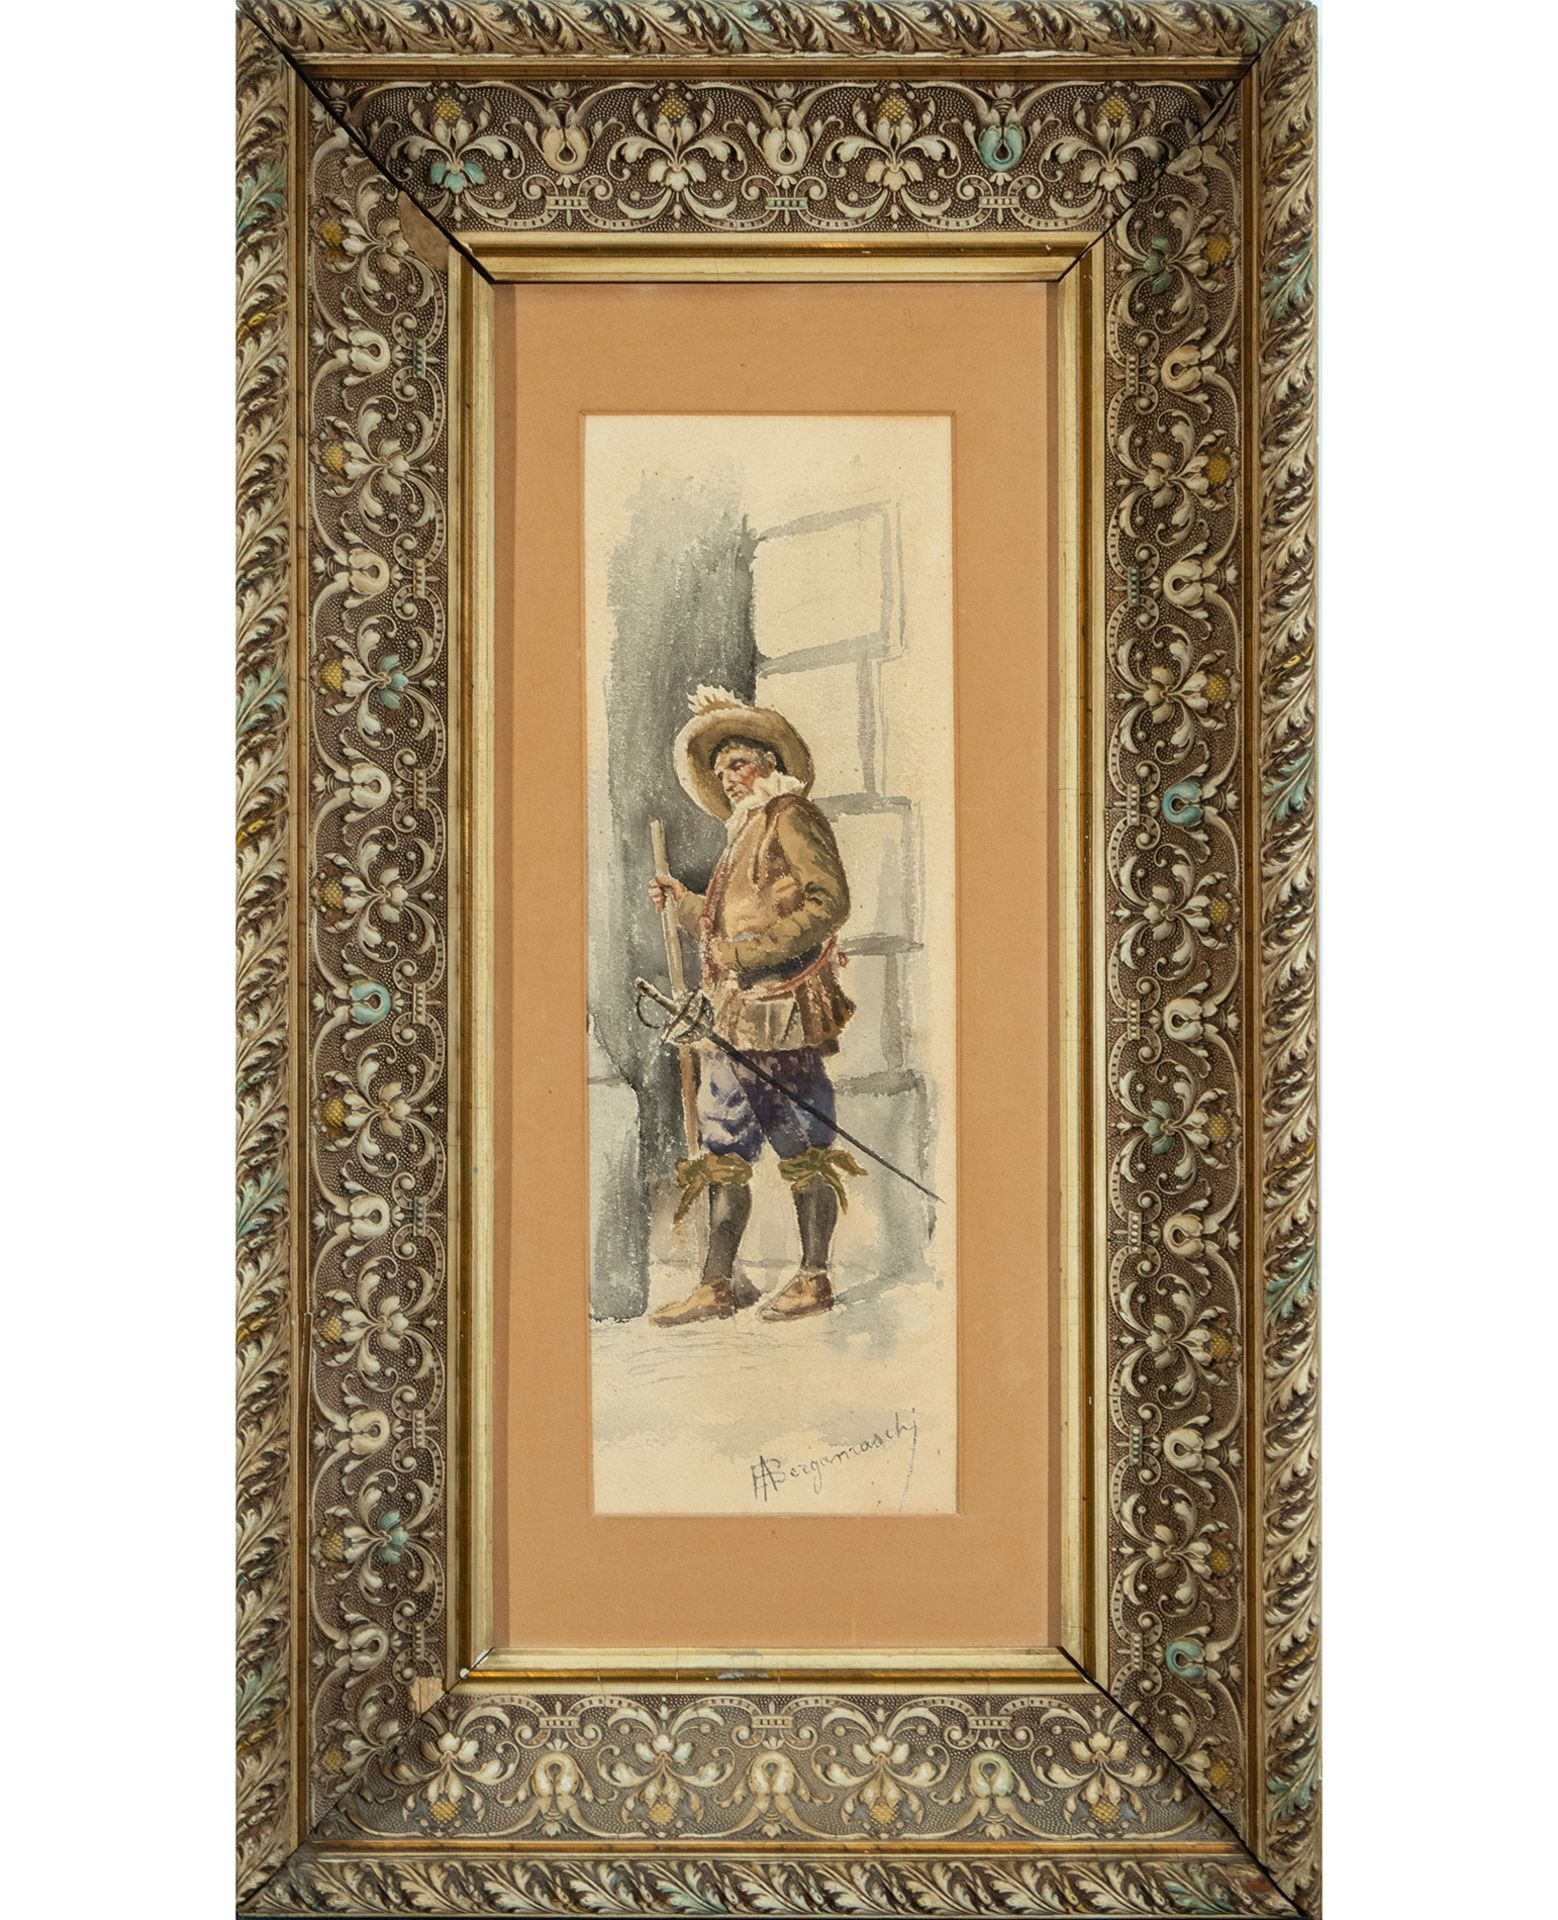 Pair of Musketeer and Musician Watercolors on Paper, 19th century Italian school - Image 5 of 8